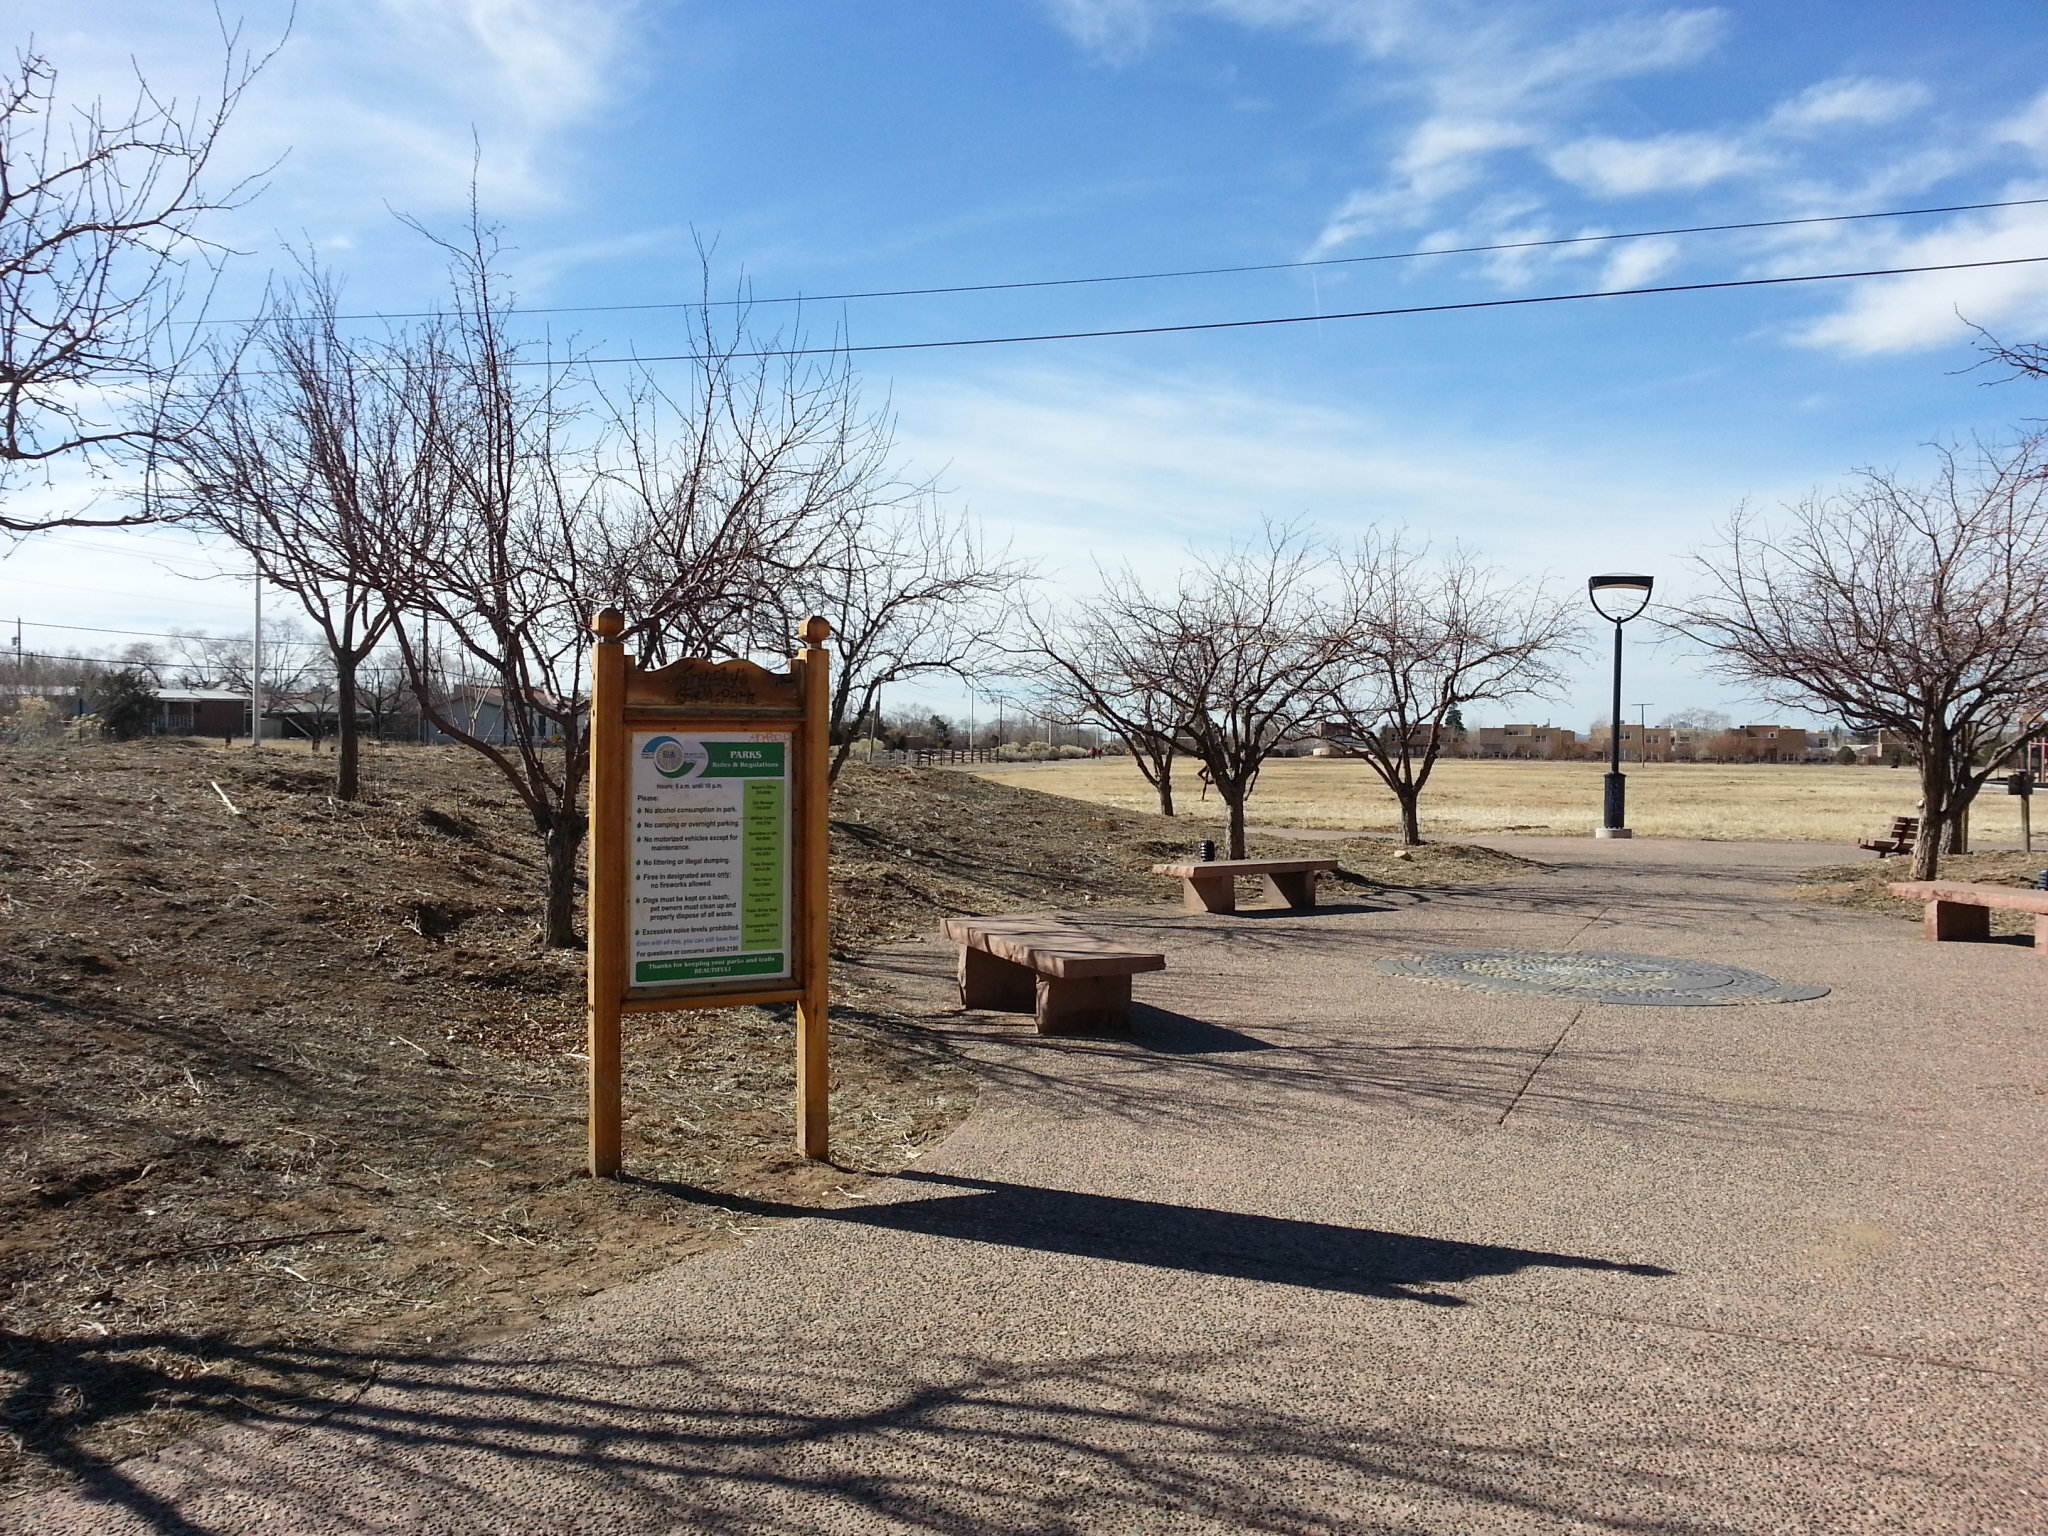 A kiosk and rest area mark the entrance at Frenchy's Field Park in Santa Fe, NM